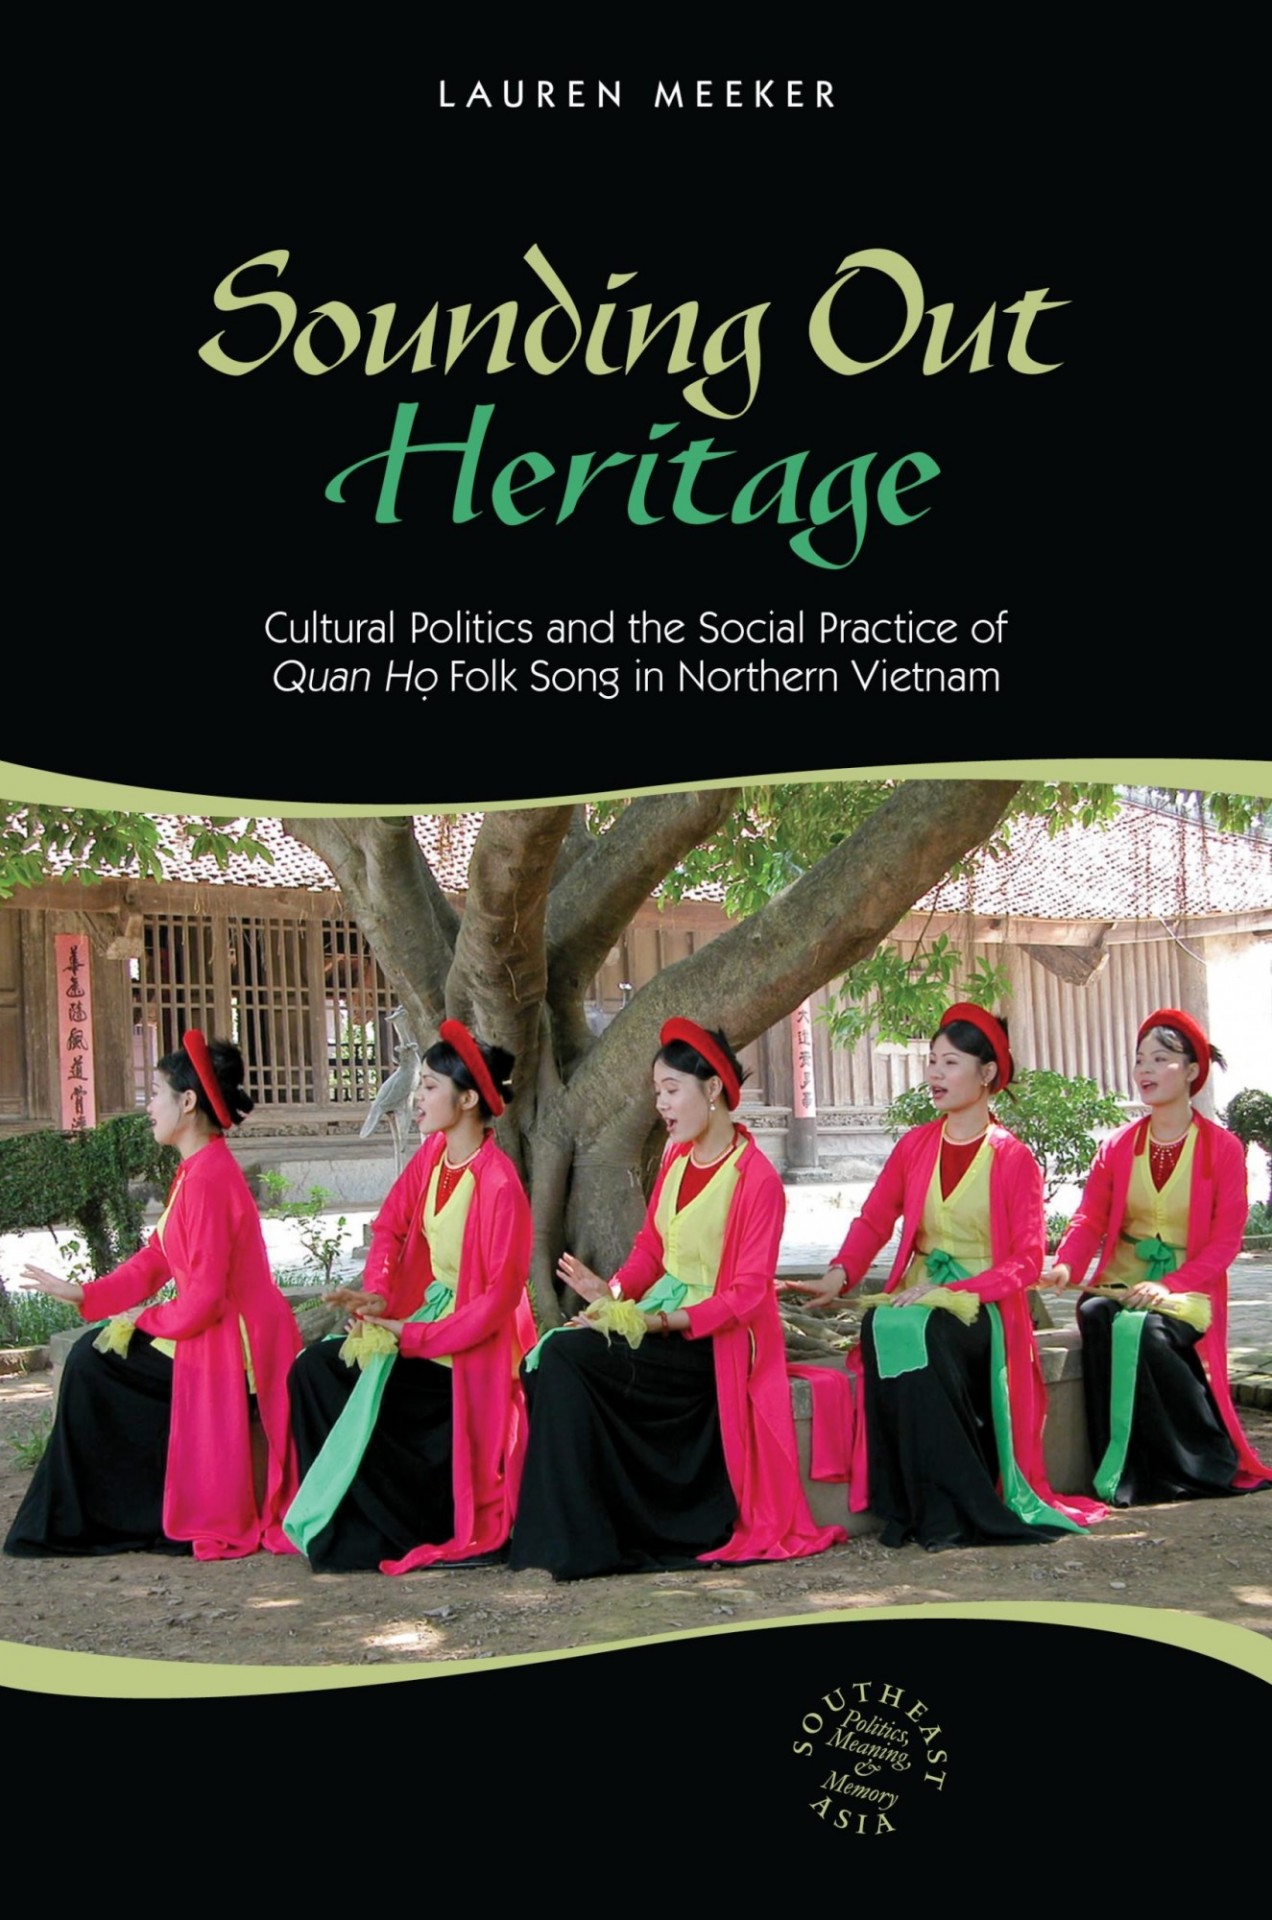 Book Cover: Lauren Meeker, Sounding Out Heritage: Cultural Politics and the Social Practice of Quan Ho Folk Song in Northern Vietnam